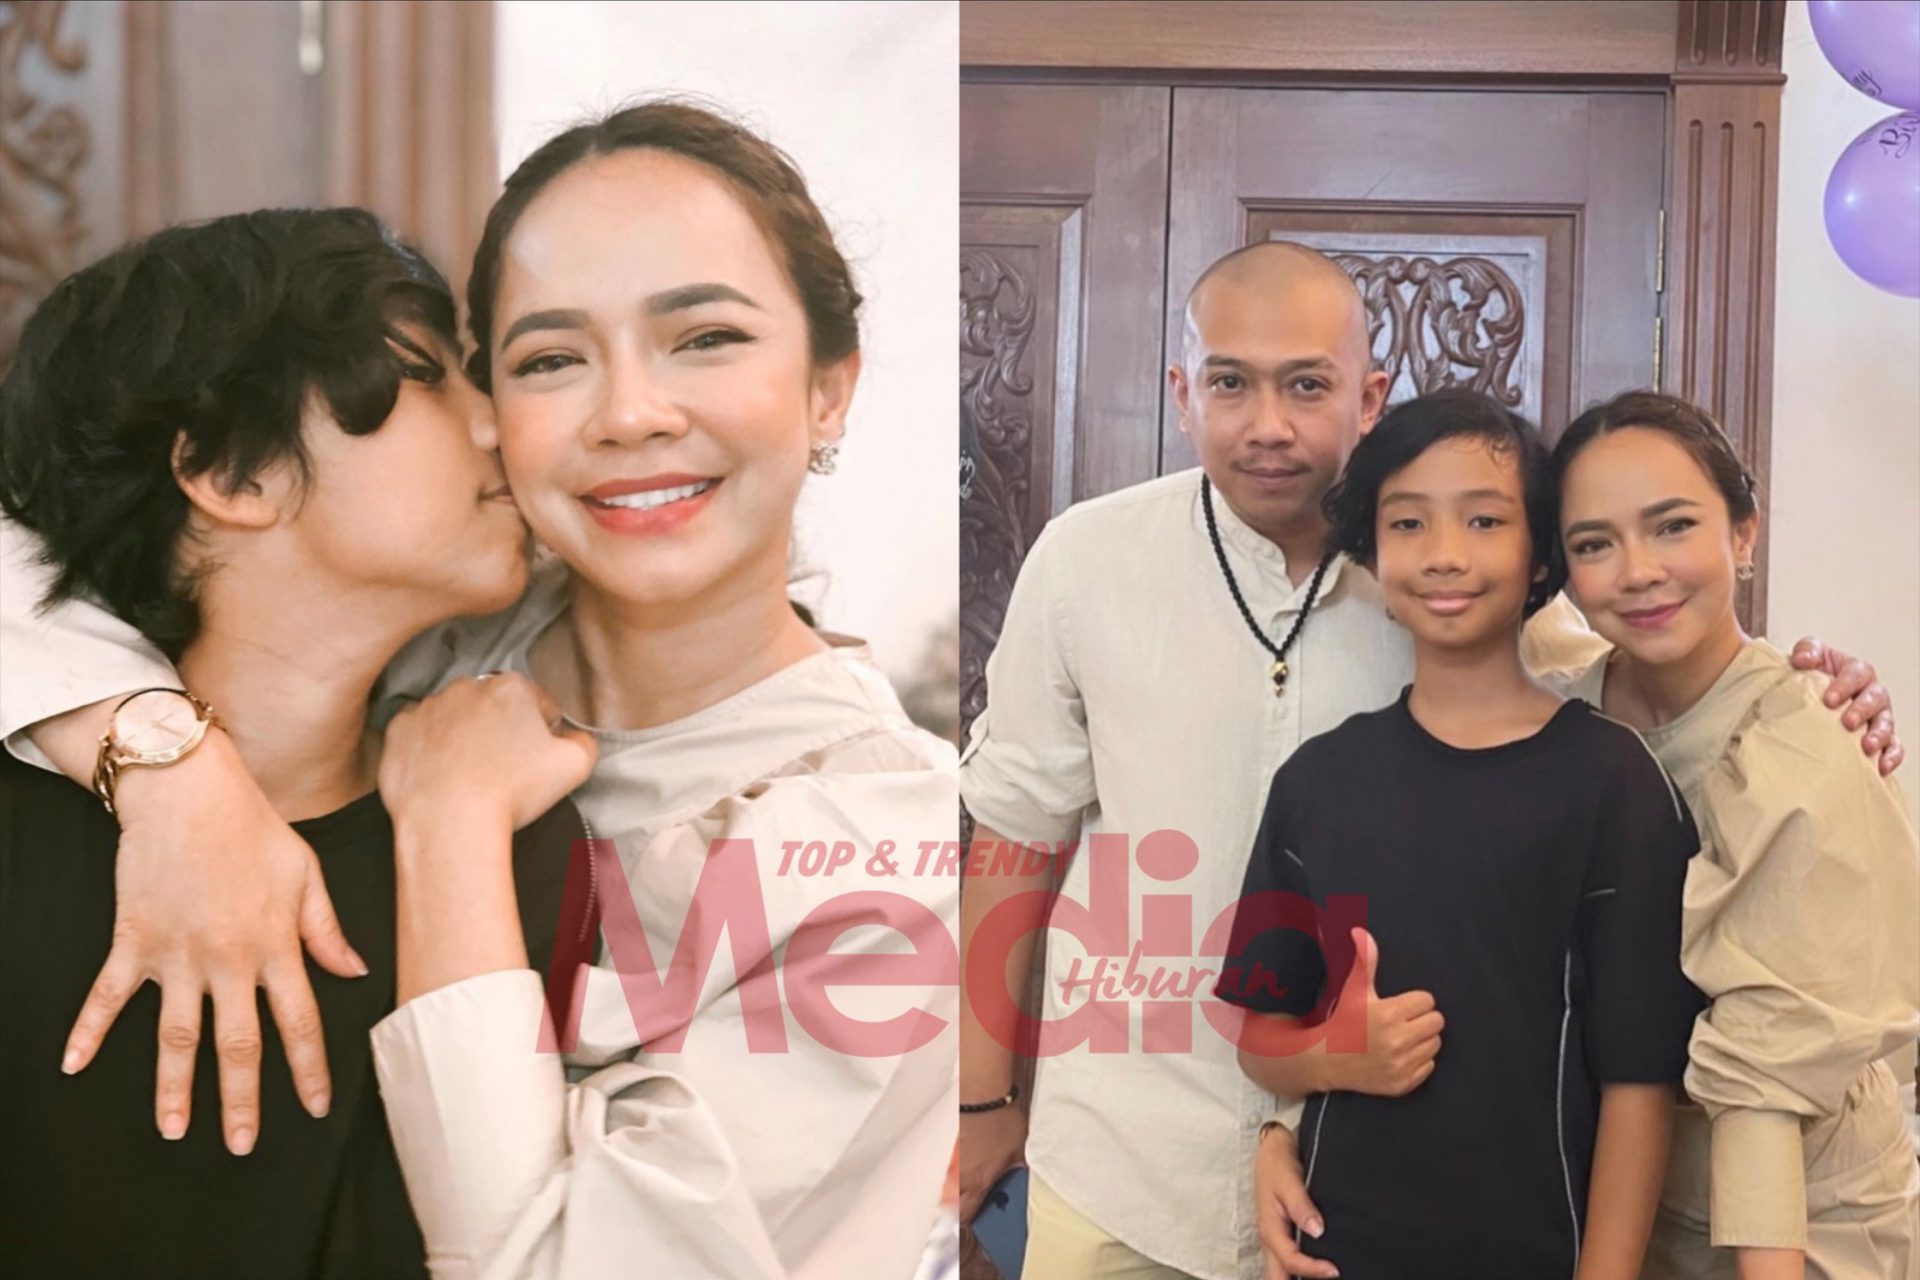 “You Are Not Allowed To Have Instagram Even At This Age….” – Genap 12 Tahun, Ucapan Nora Danish Buat Anak Sulung Bikin Ramai Tersentuh